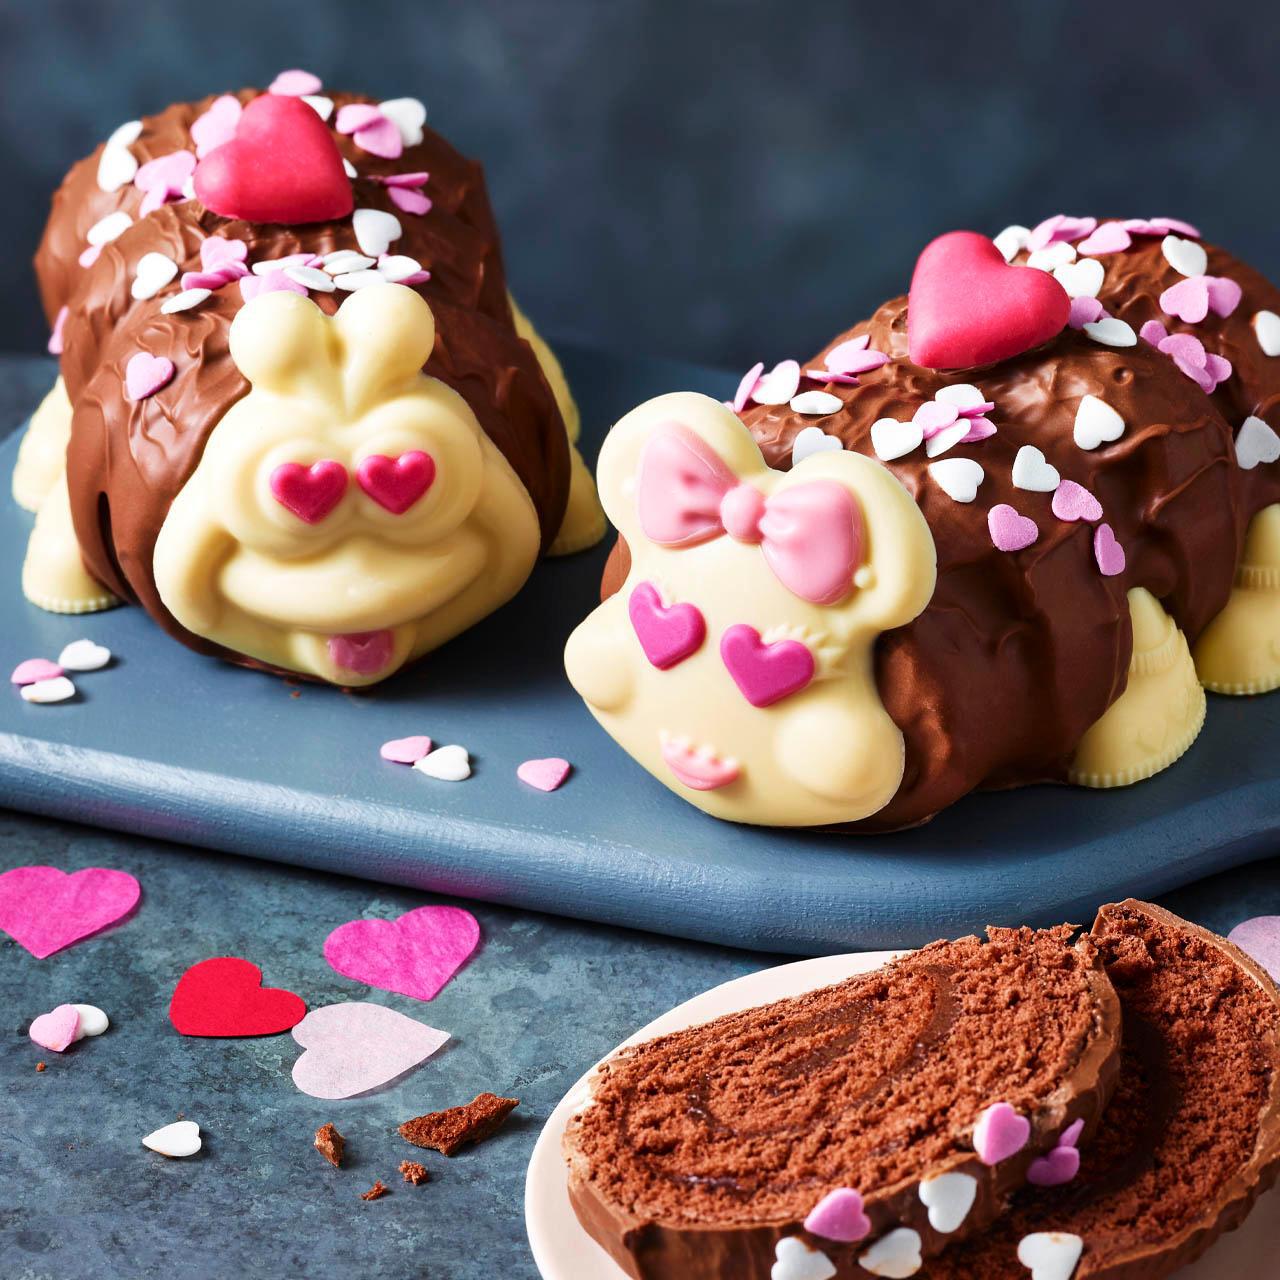 M&S Love is in the Air Colin the Caterpillar Cake 350g